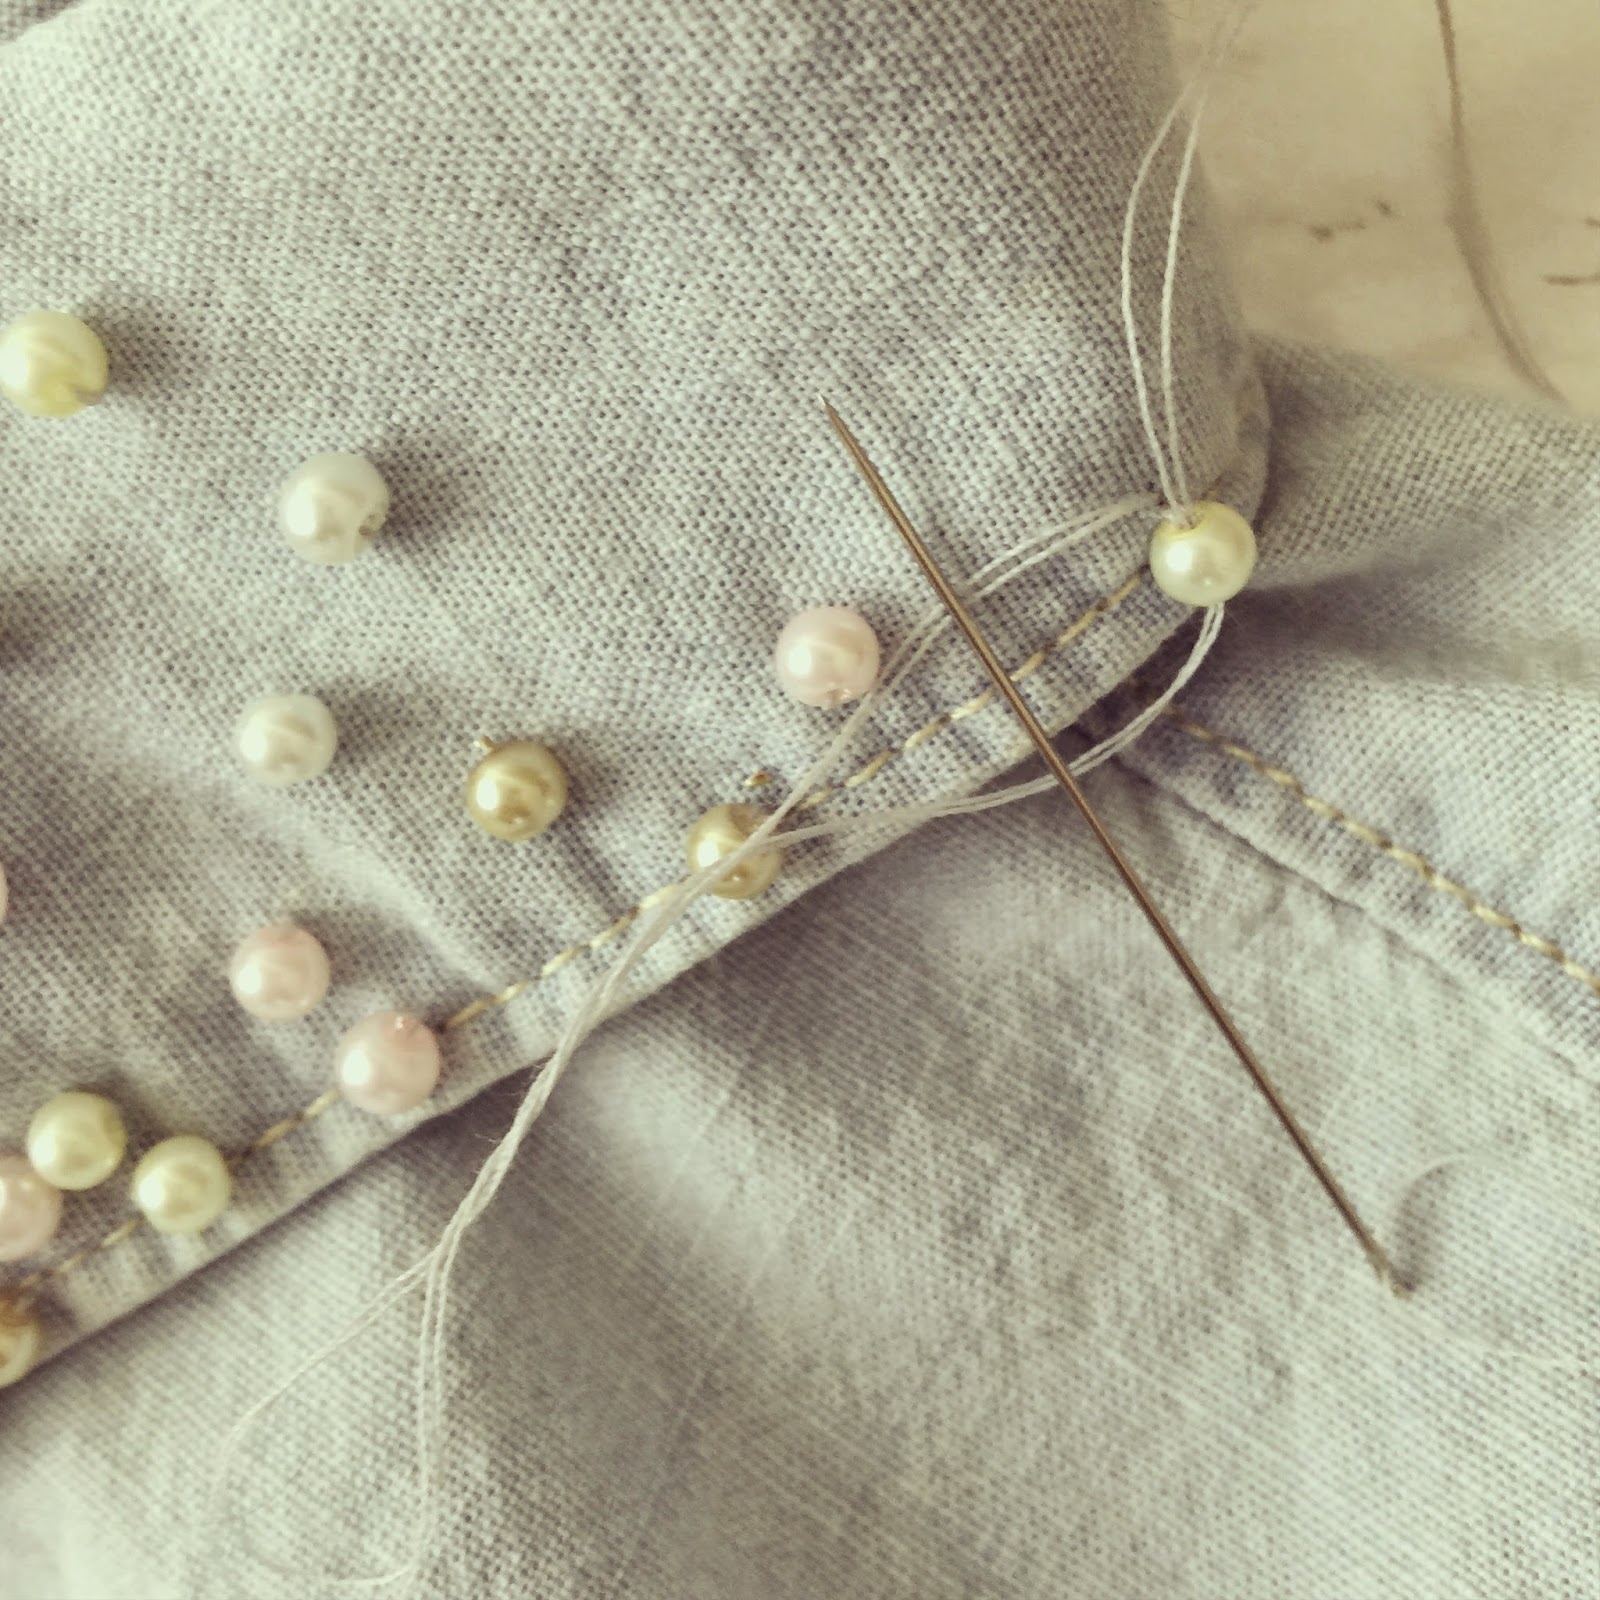 DIY Beaded Shirt Tutorial That Will Bring To Life Your Old Shirt